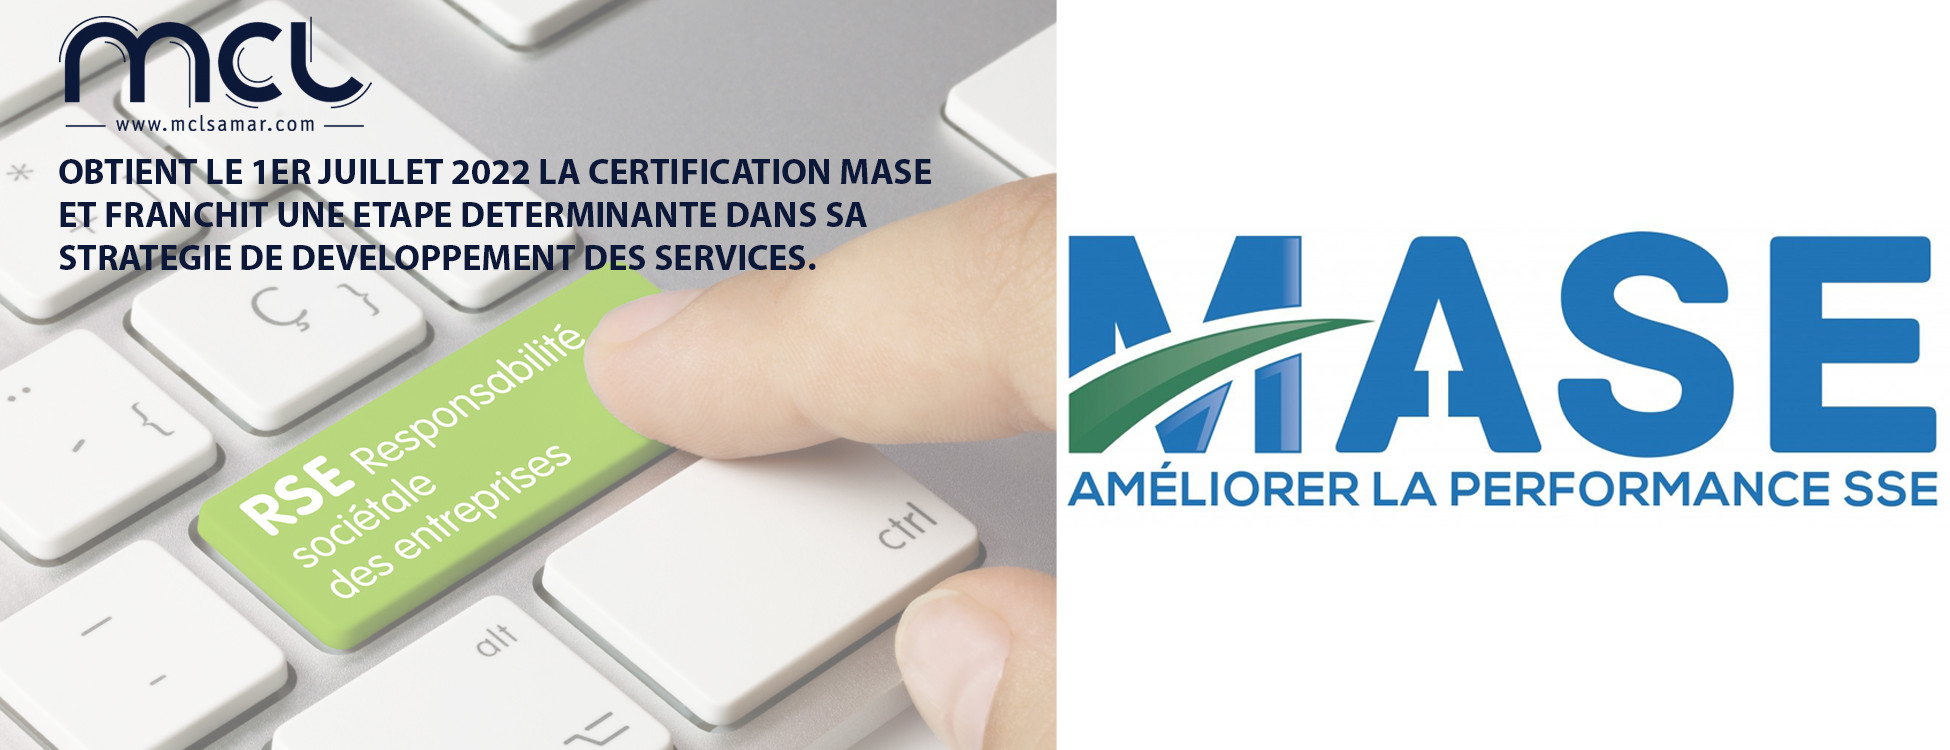 MCL CERTIFICATION MASE